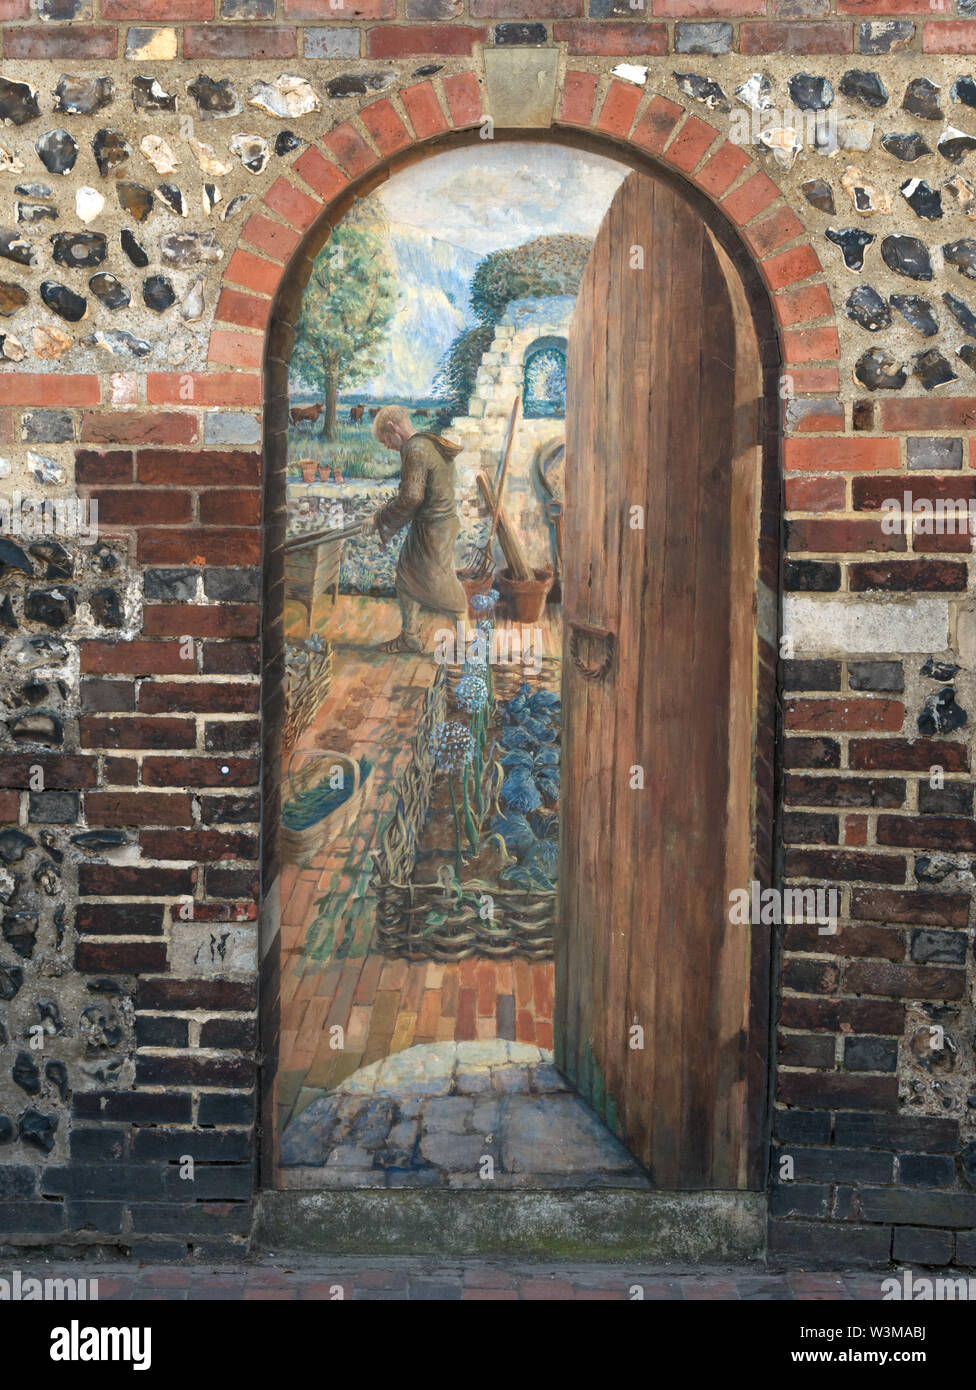 Trompe-l'œil painting in old brick wall gate depicting entrance to Greyfriars Franciscan Friary, Friars Walk, Lewes, East Sussex, England, UK. Stock Photo